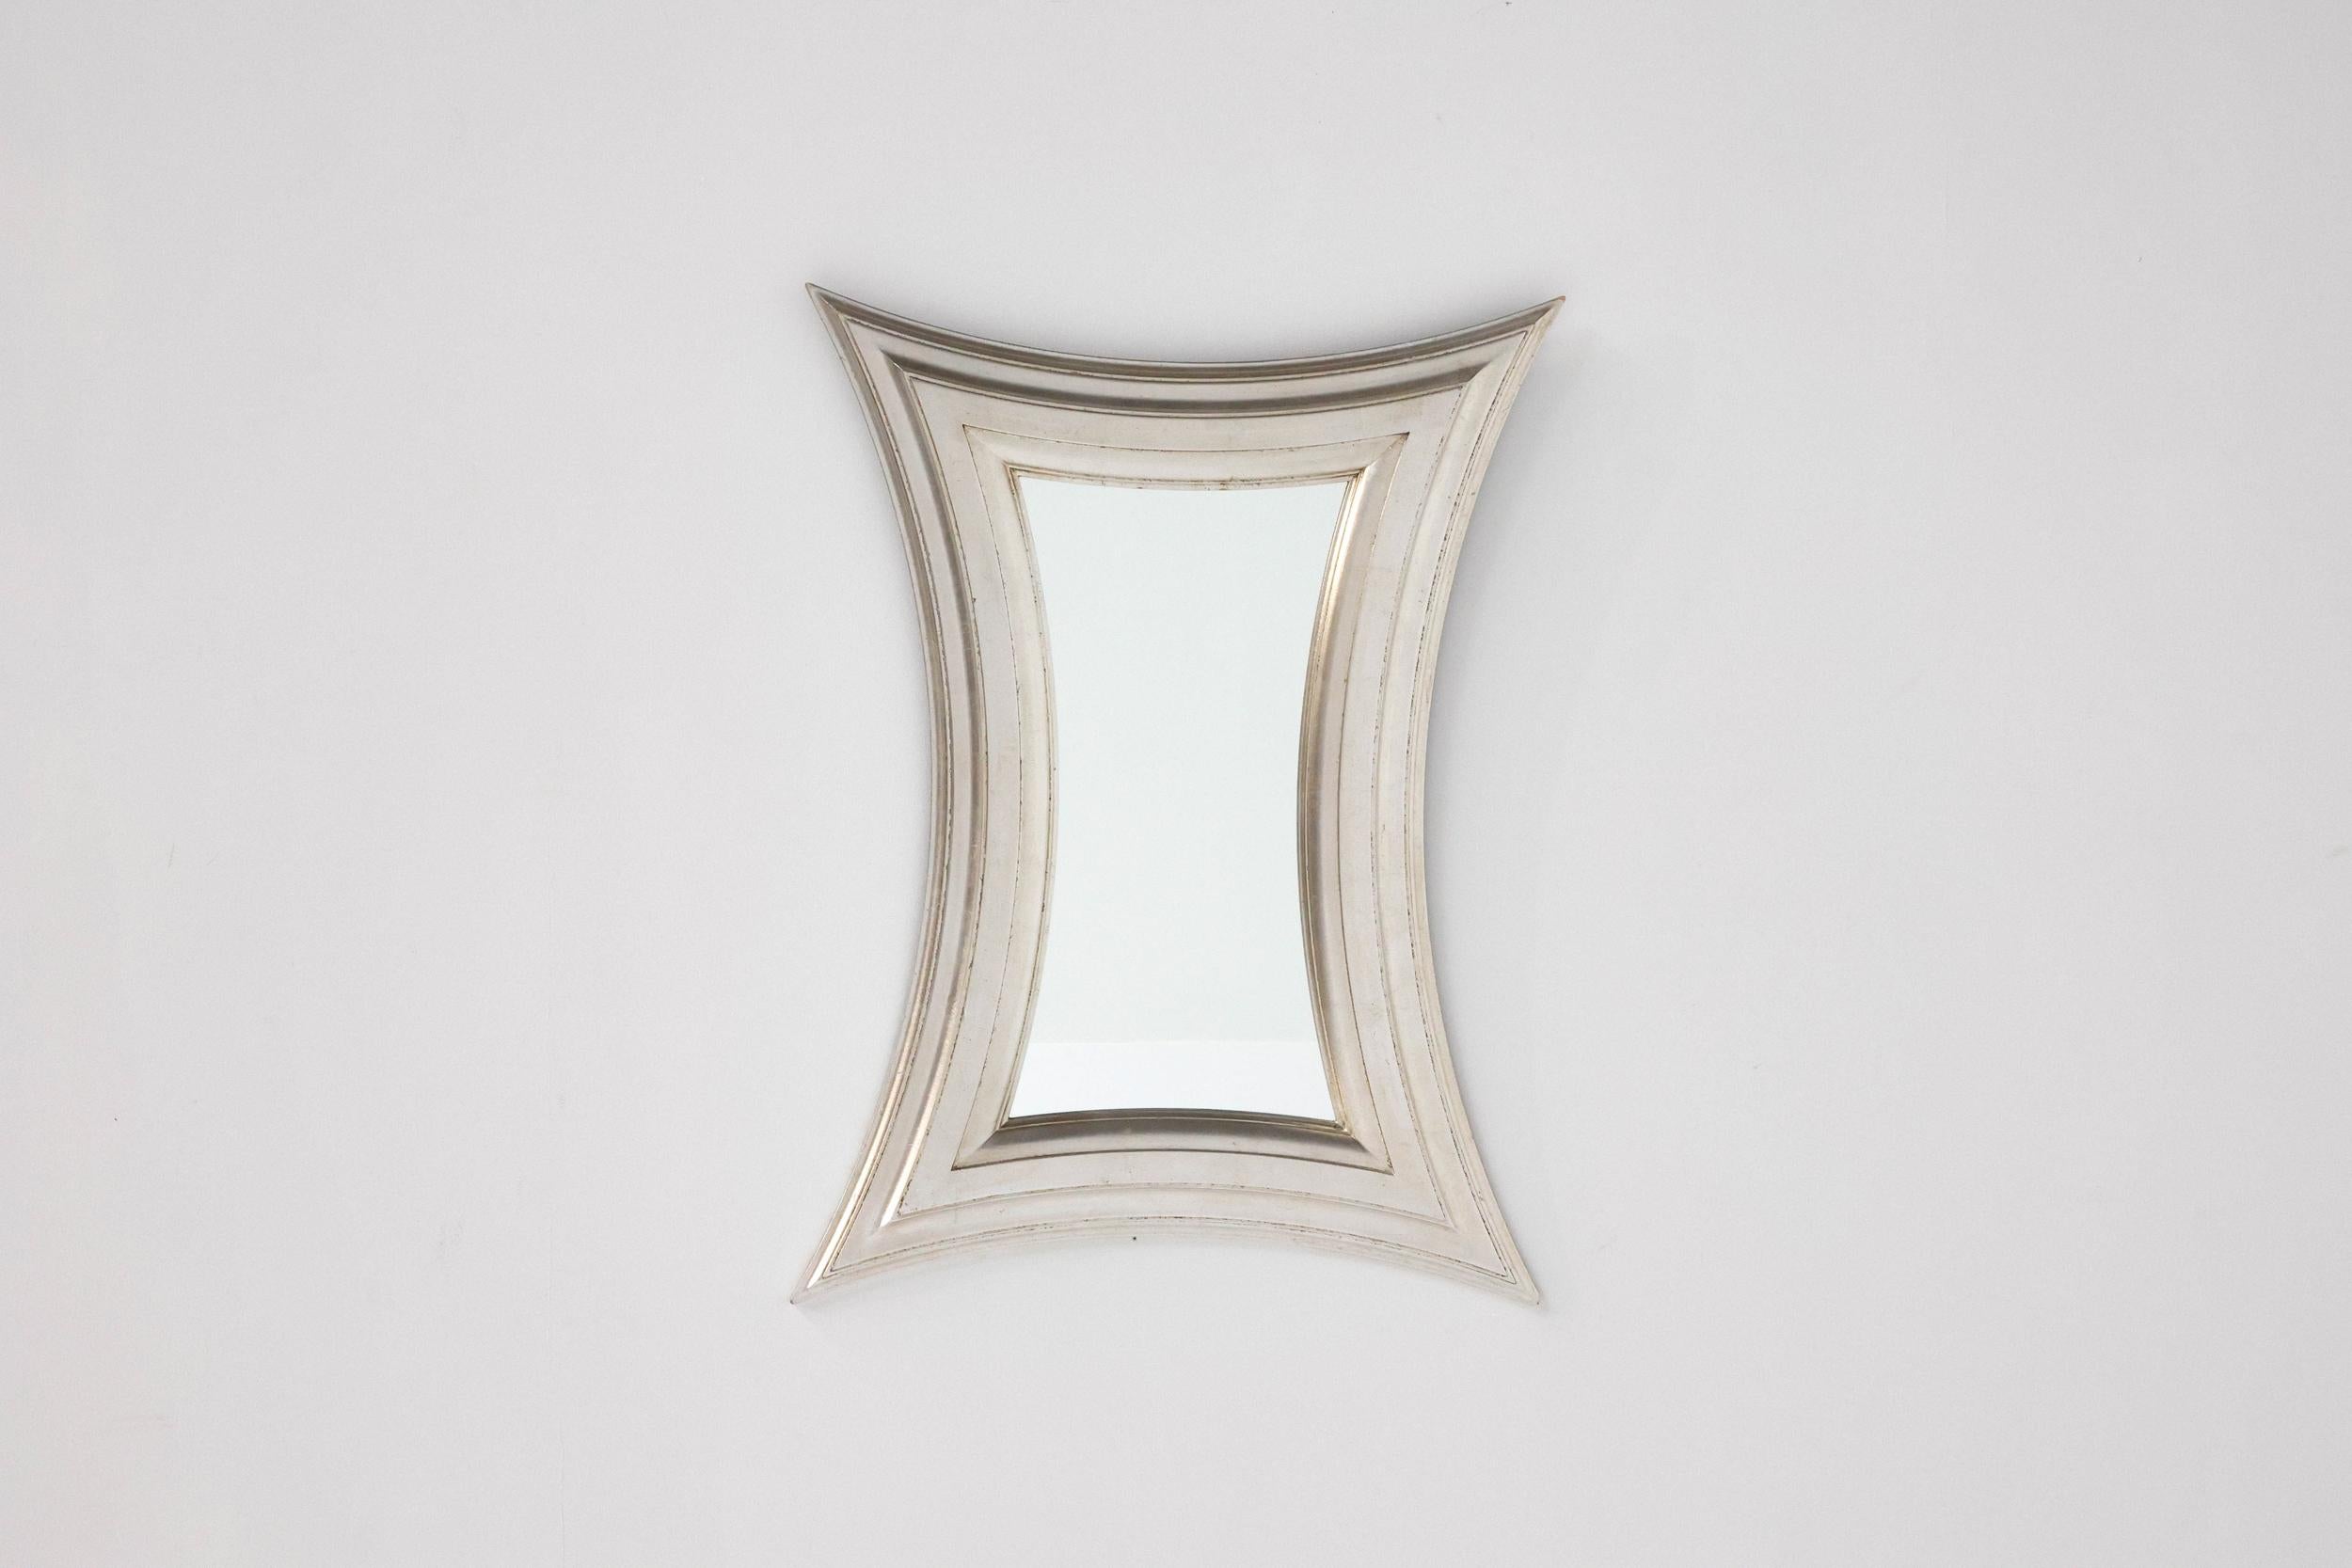 Hollywood Regency; France; mirror; Make-up mirror; Deconstructed; Metal;

Deconstructed organic rectangle mirror with metal frame. Would fit well in a Hollywood Regency-style interior. Has a futuristic and elegant feeling to it.